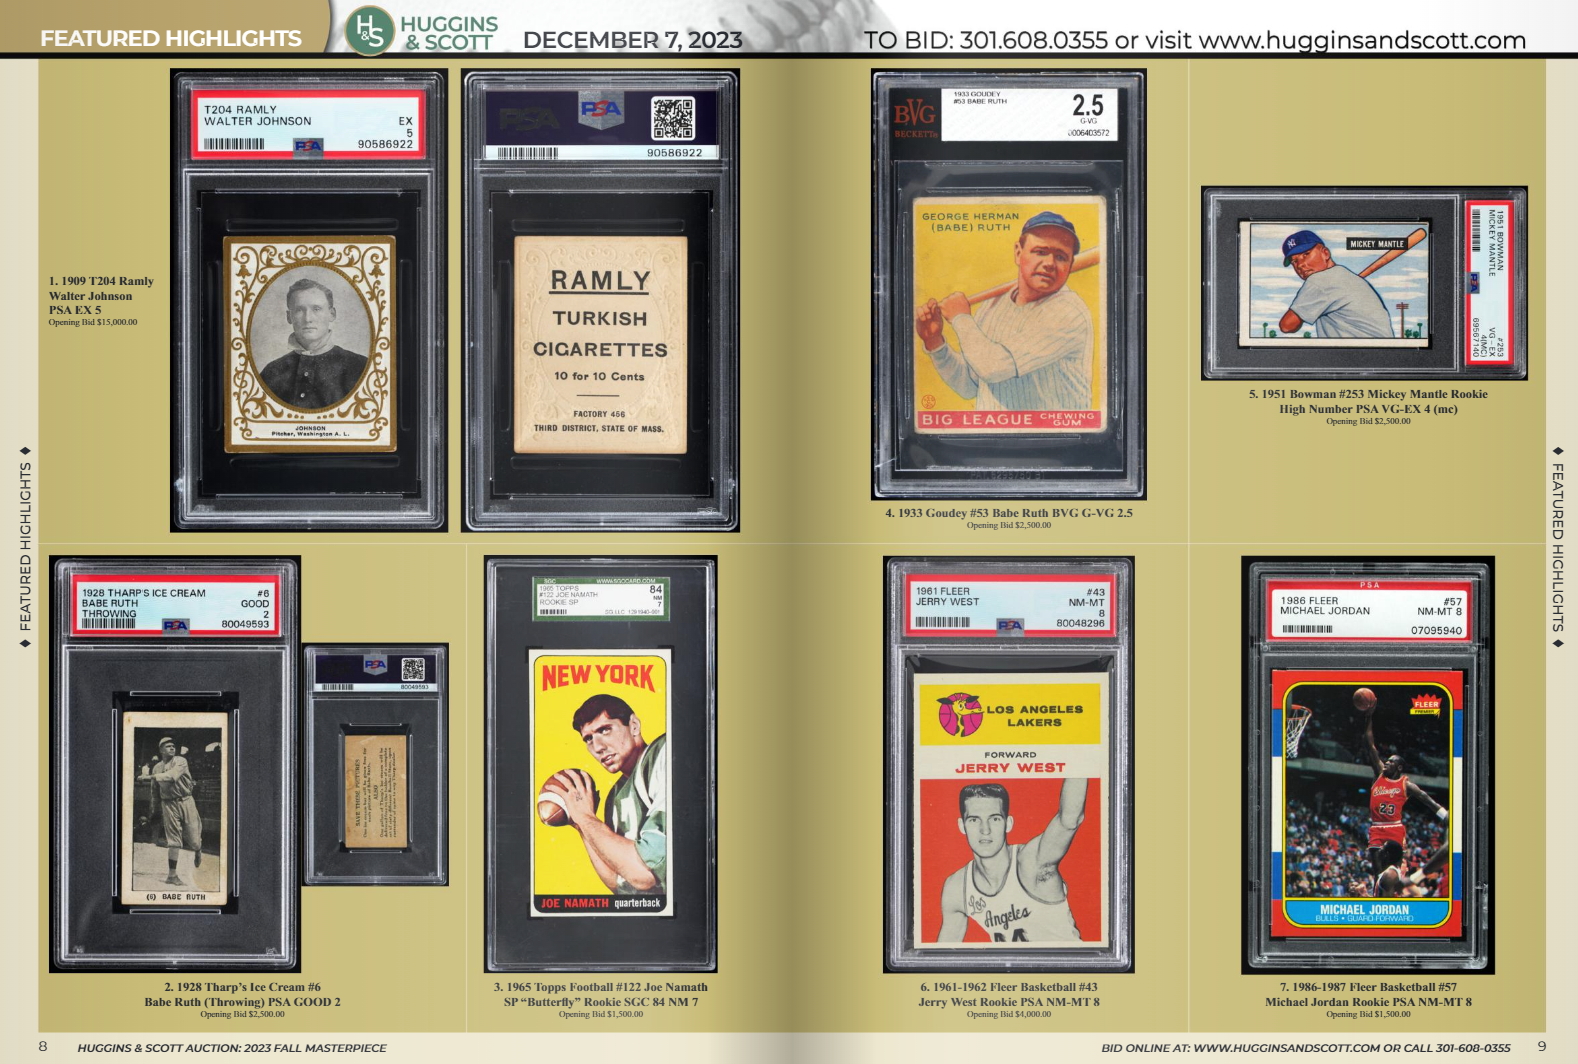 Extensive Collection of Vintage Sports Cards and Notre Dame Memorabilia Featured in Huggins & Scott's Fall Auction